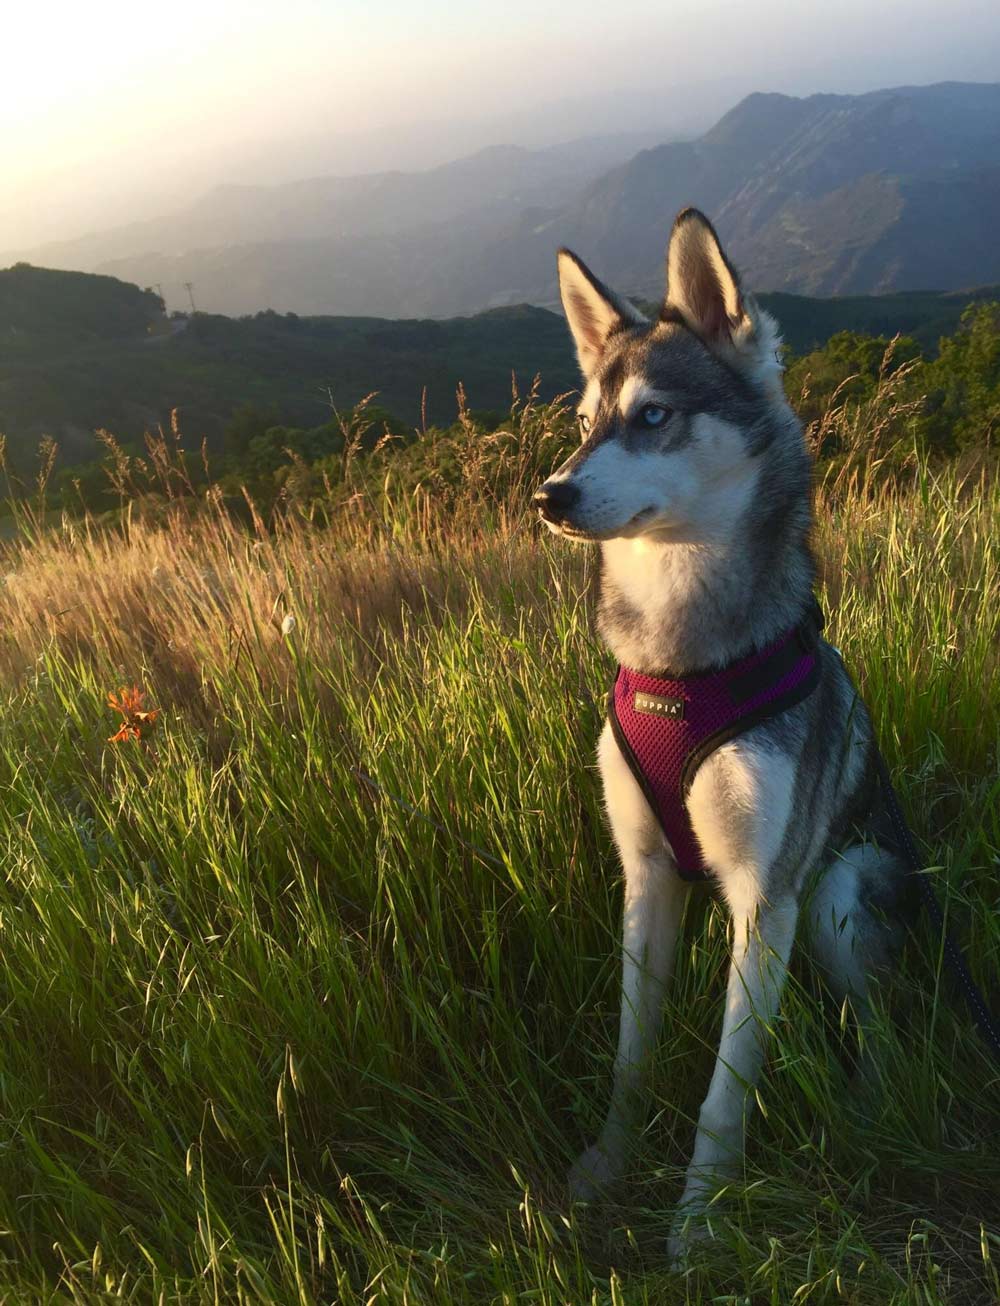 Took my girl on a sunset hike